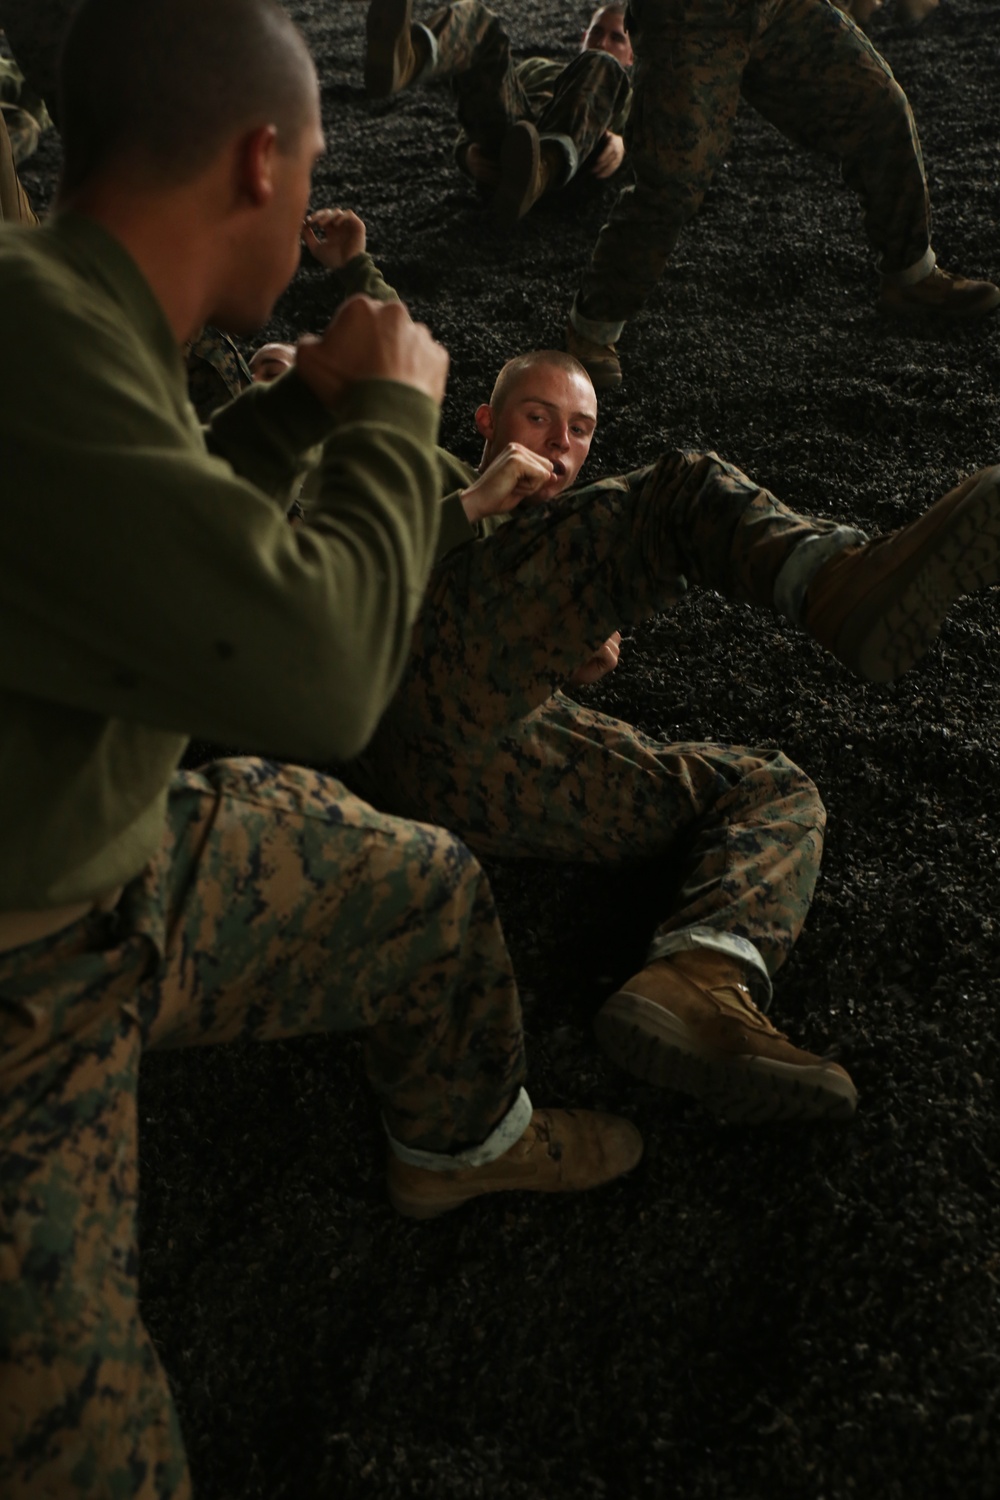 Photo Gallery: Marine recruits partner up for martial arts training on Parris Island